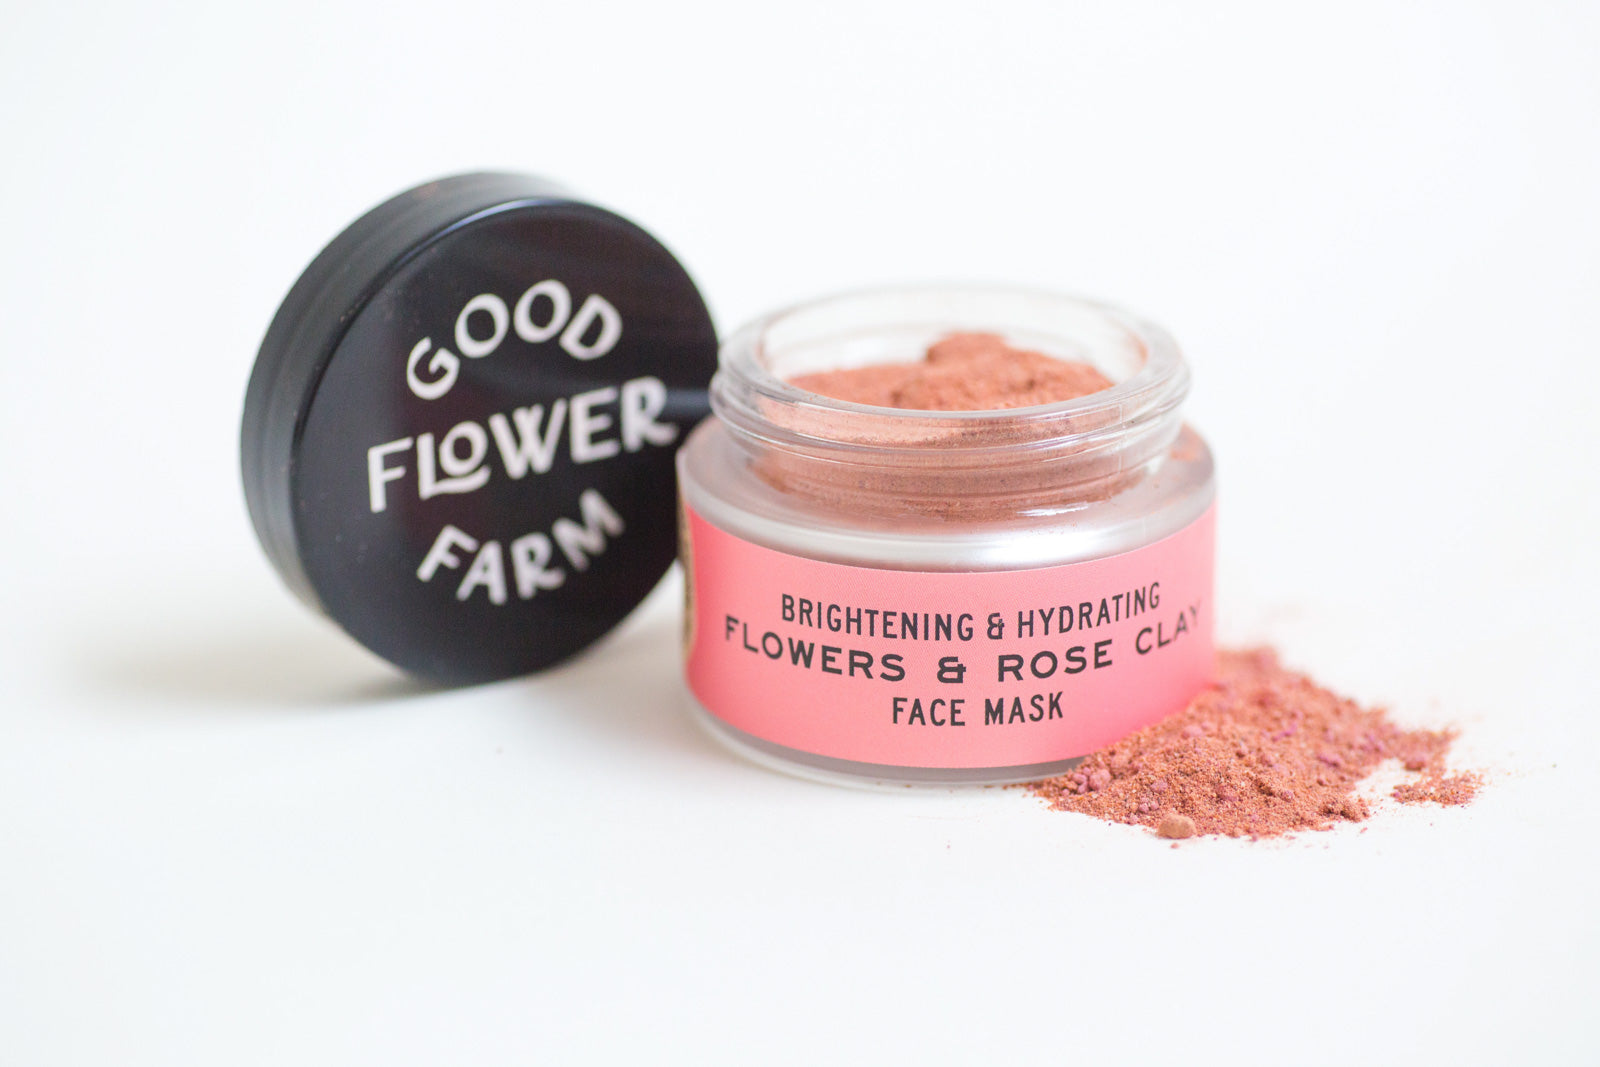 Flowers & Rose Clay Botanical Face Mask by Good Flower Farm